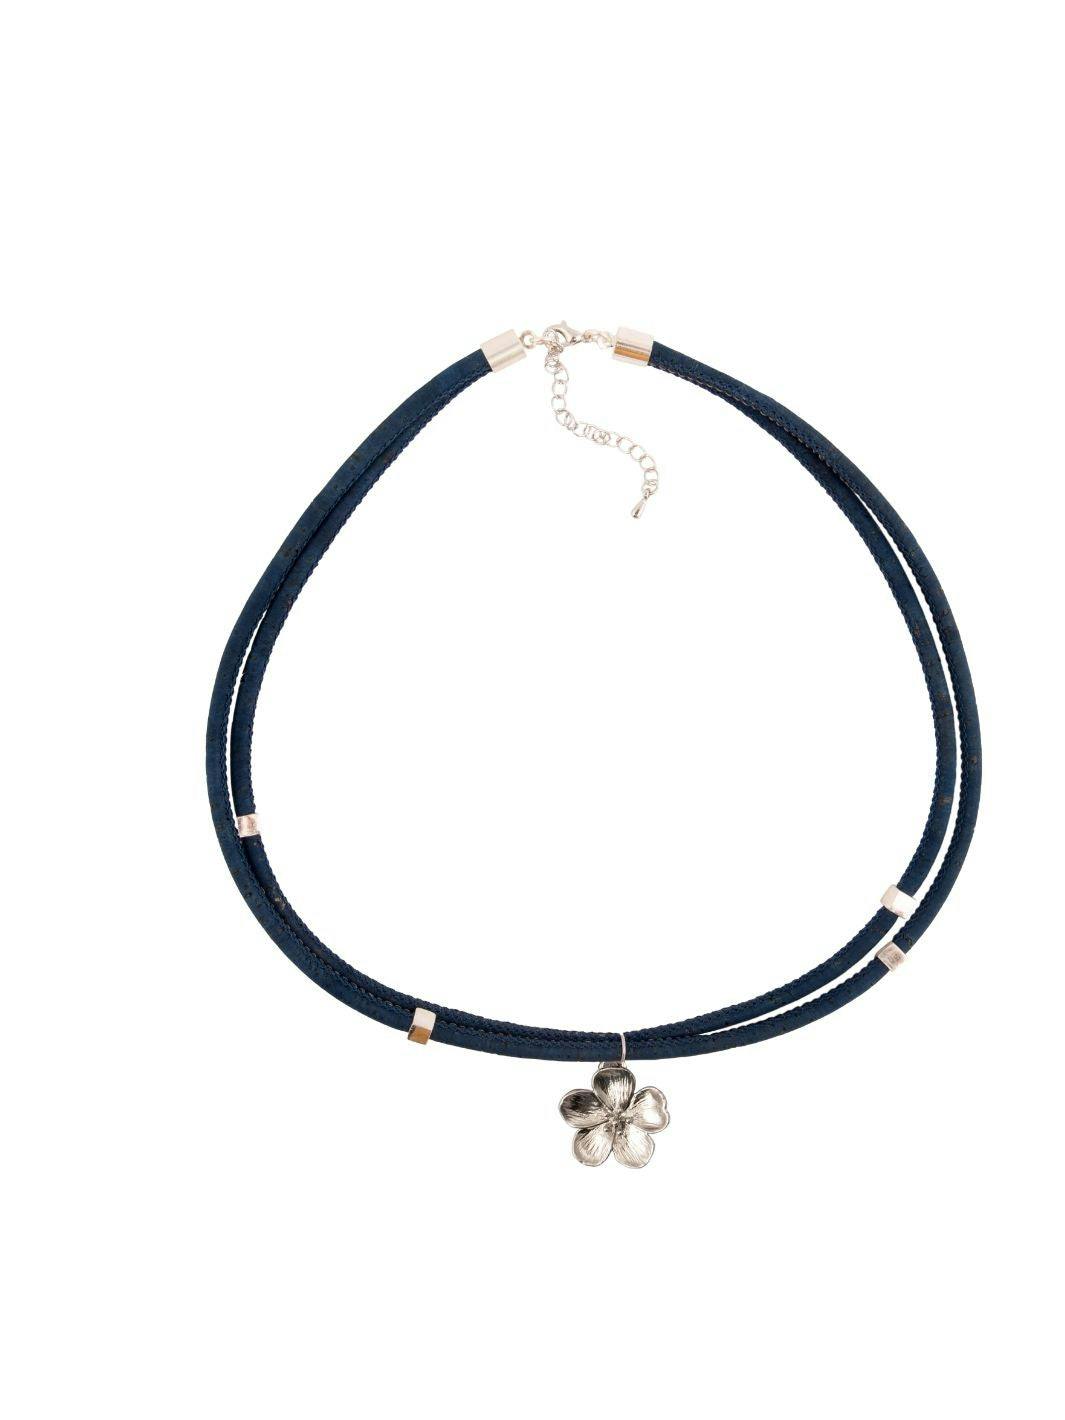 Moon Flower in Silver and Navy Blue Cork Necklace, a product by FOReT®